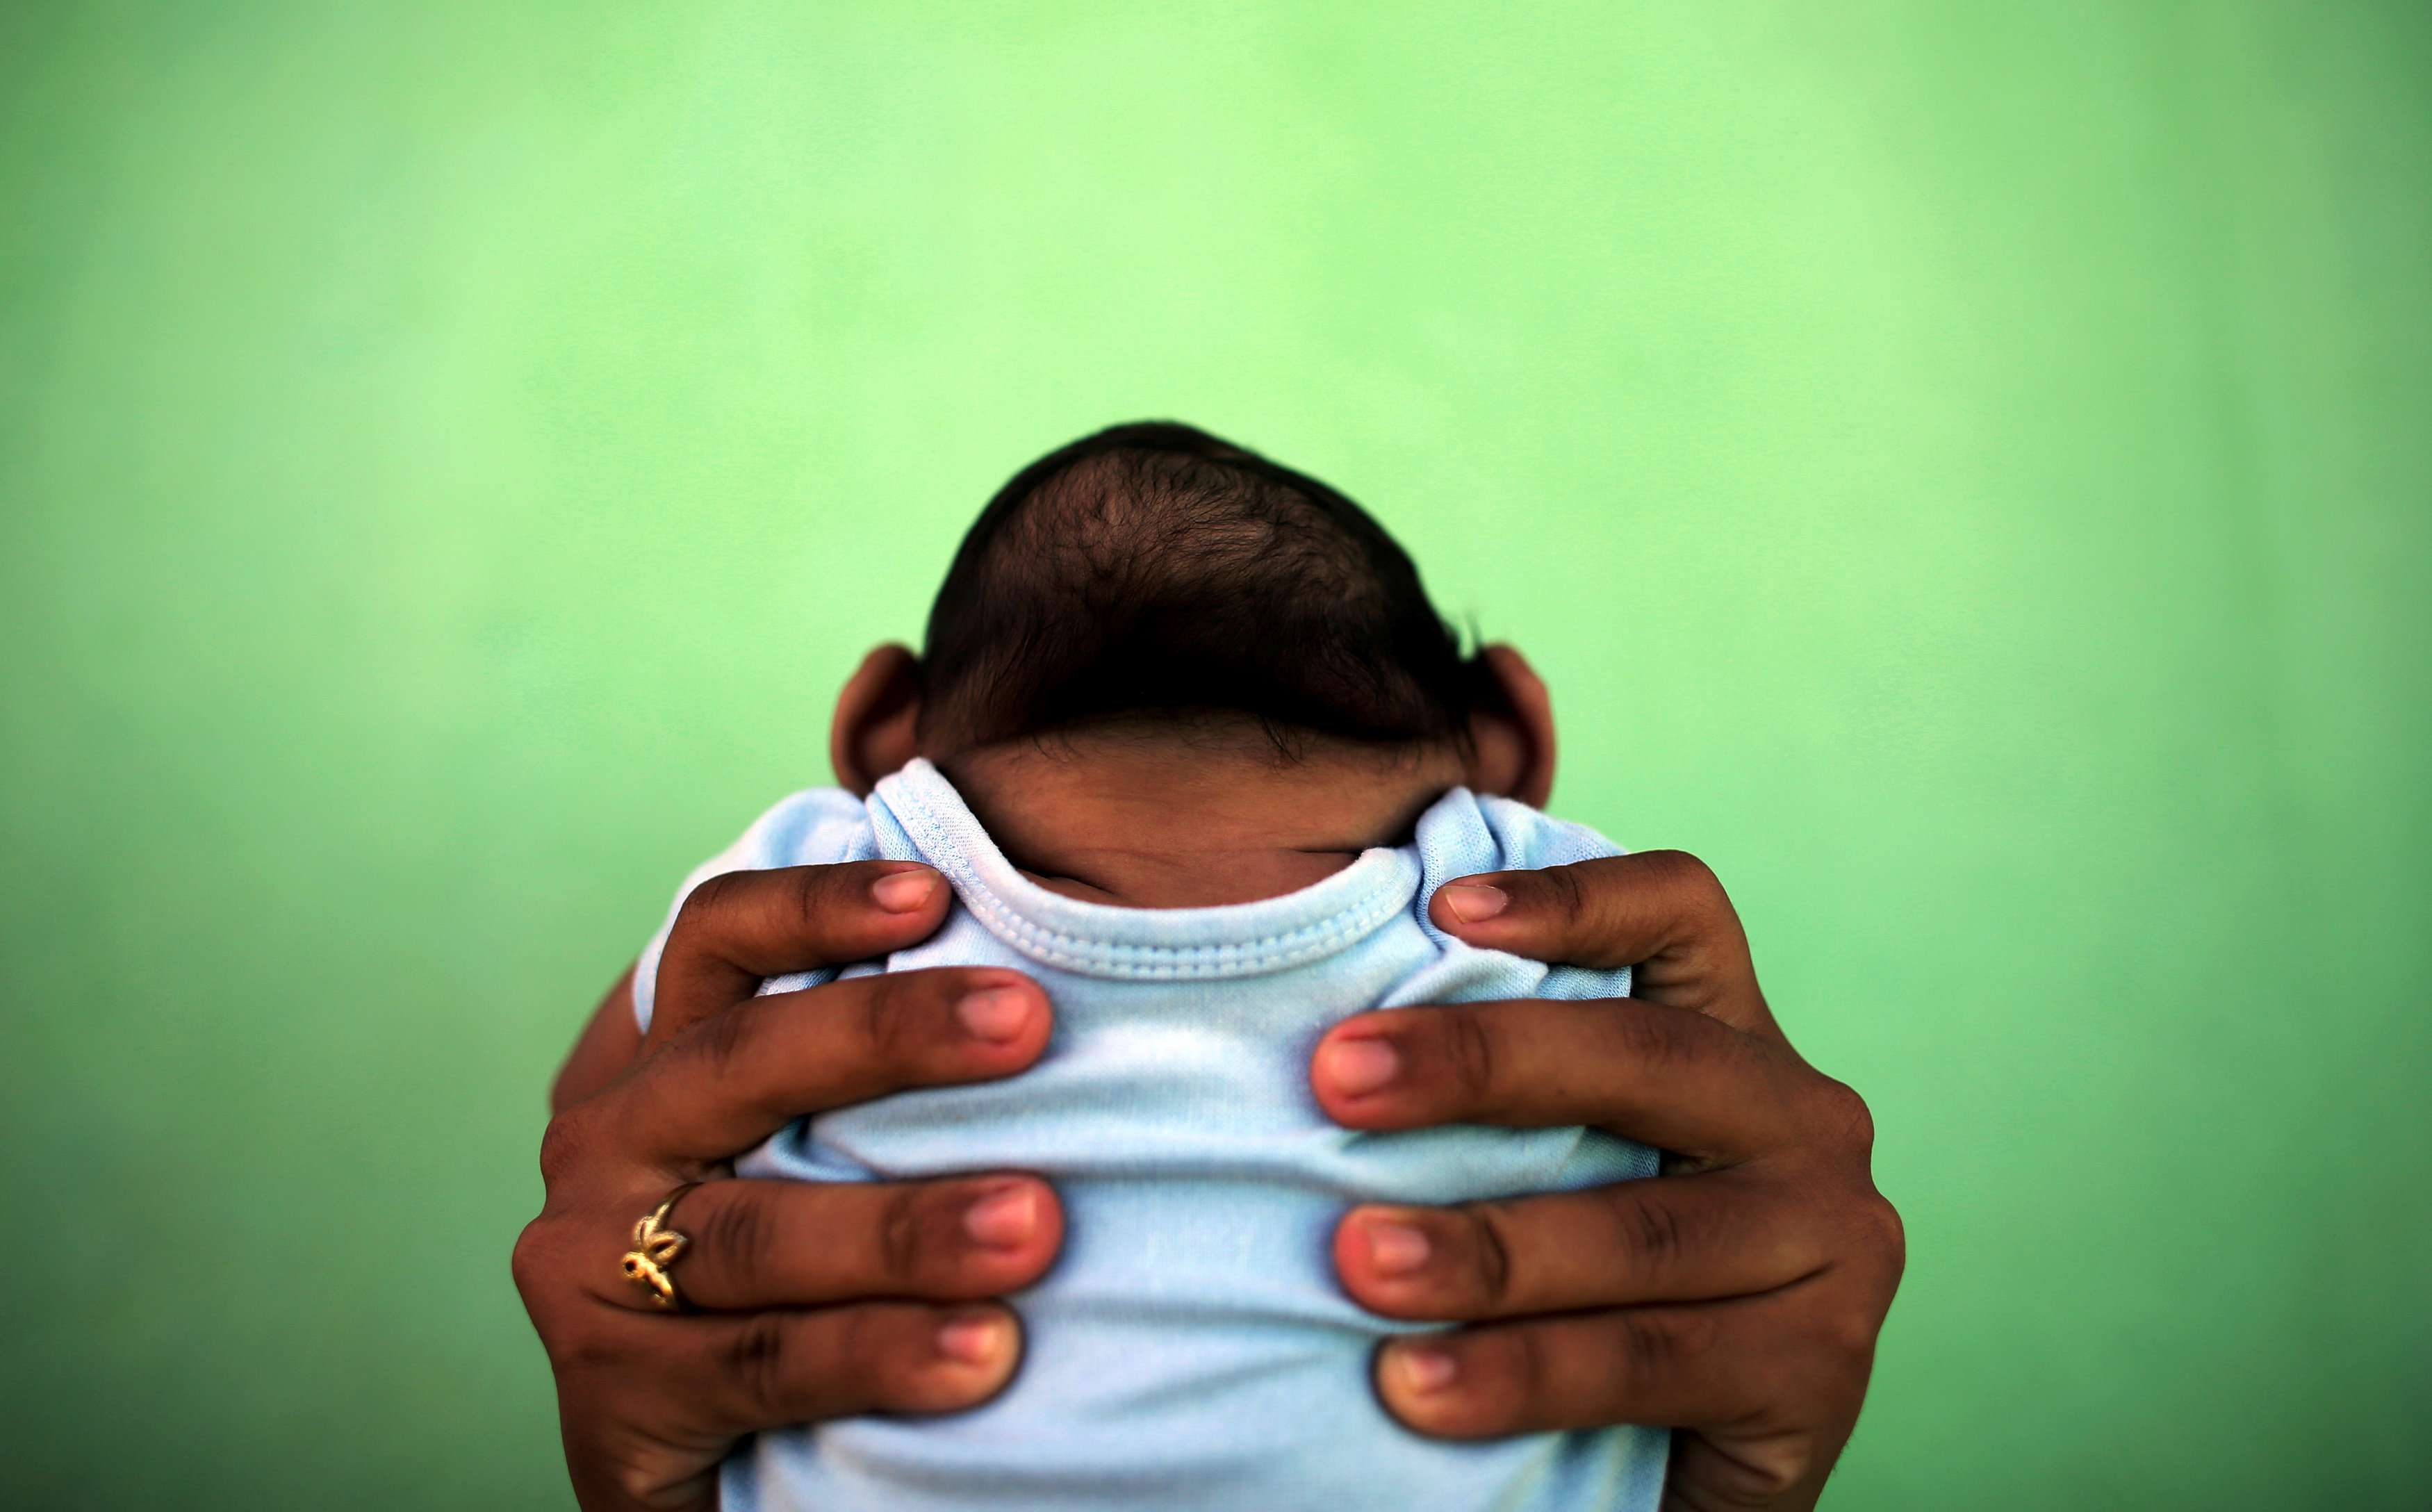 A four-month-old baby born with microcephaly is held by his mother in front of their house in Olinda, near Recife, Brazil. Pregnant women infected by the mosquito-borne Zika virus run the risk of giving birth to babies with this defect. Photo: Reuters